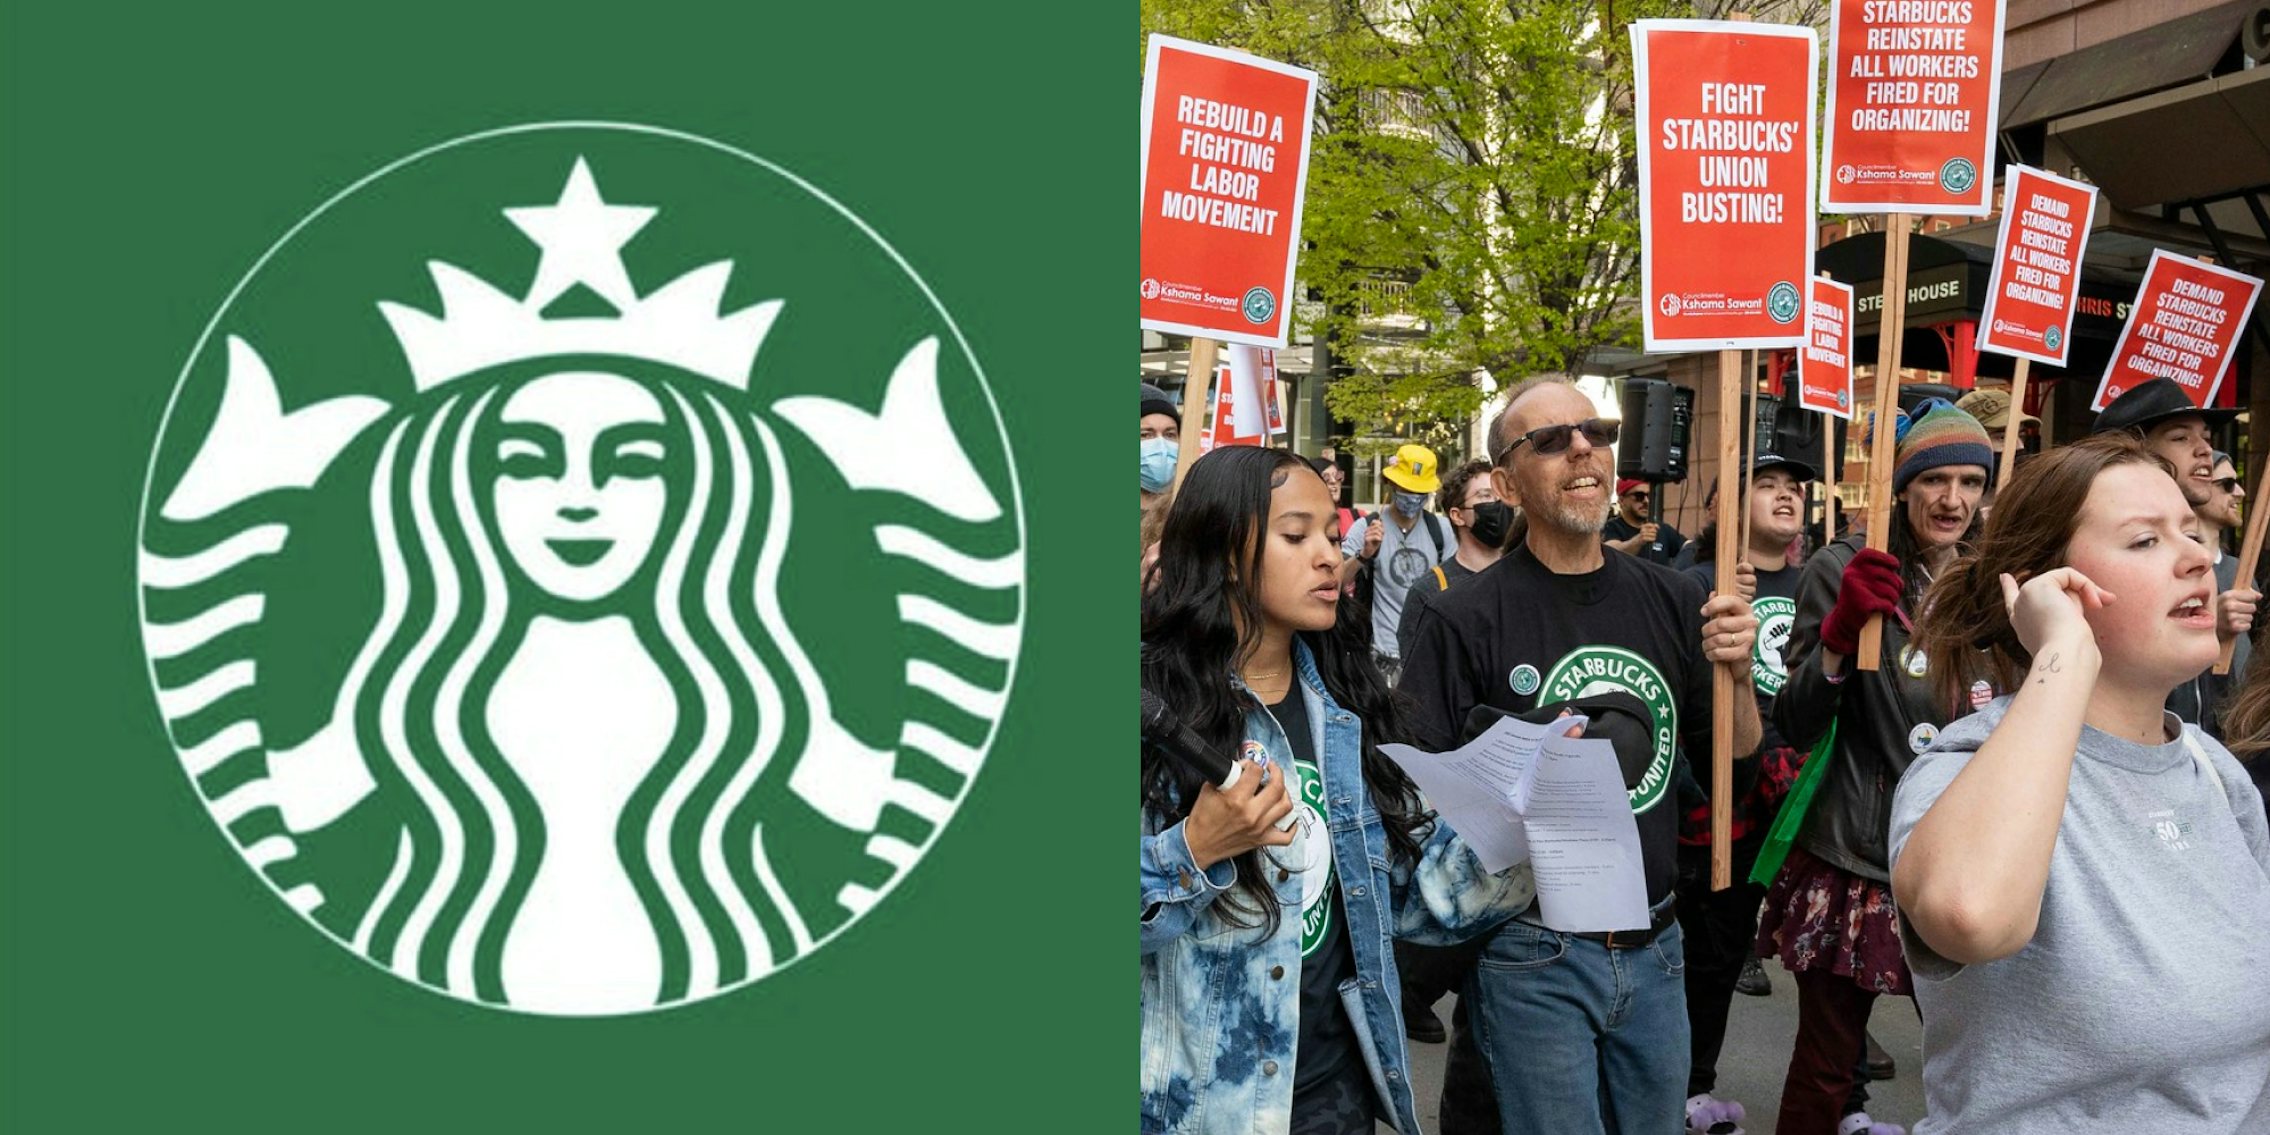 1) green starbucks logo of the siren 2) starbucks workers united organizers marching, holding up red signs reading 'fight starbucks union busting!'